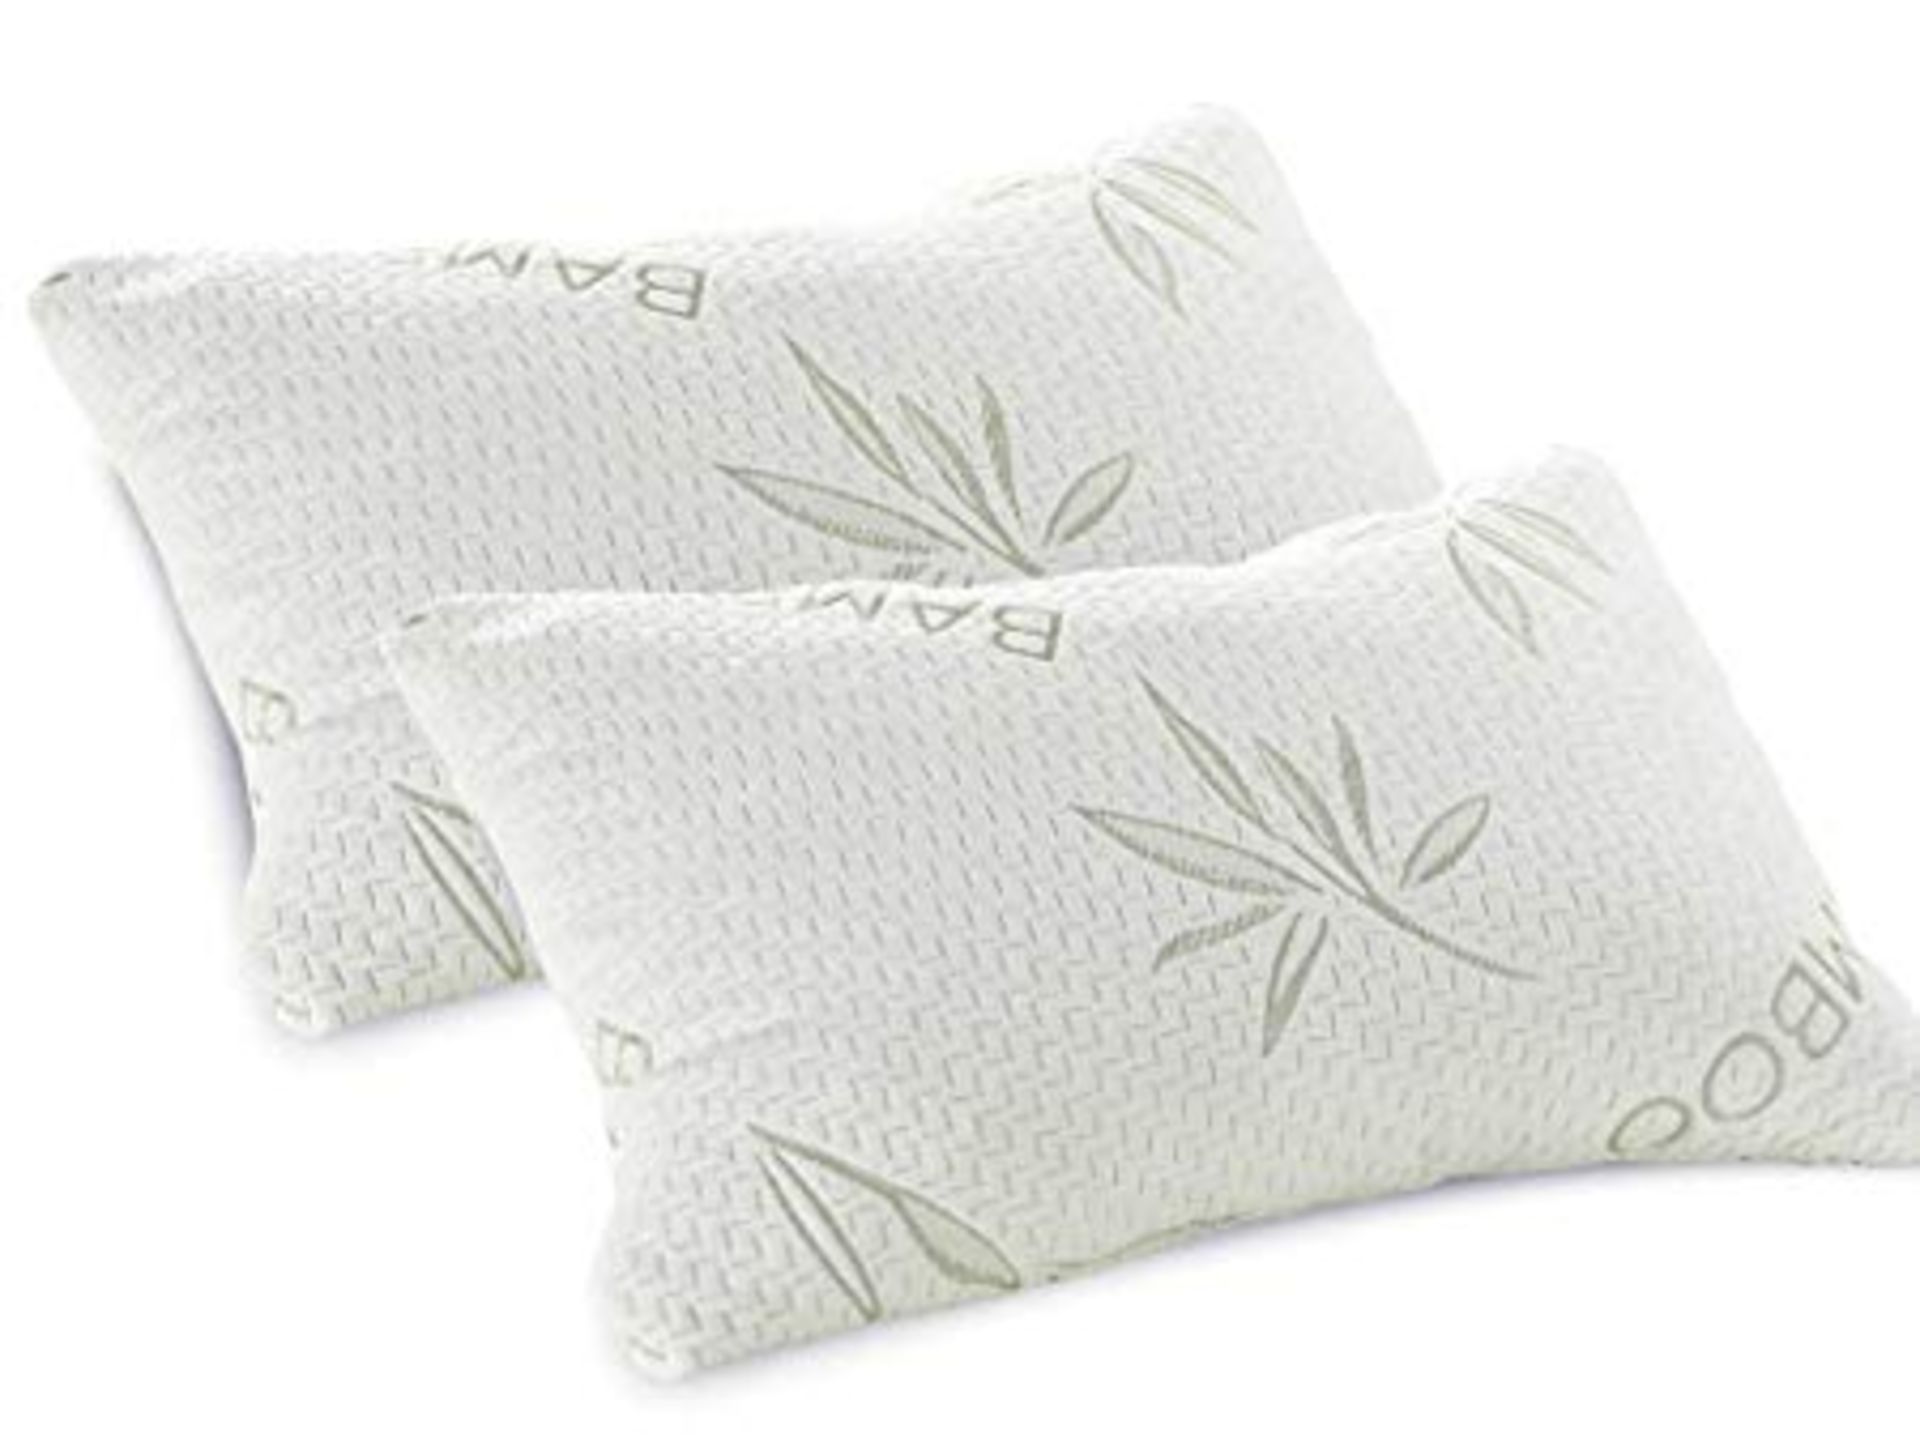 + VAT Brand New Memory foam pillow Eco cover resists mould and mites - Image 2 of 2